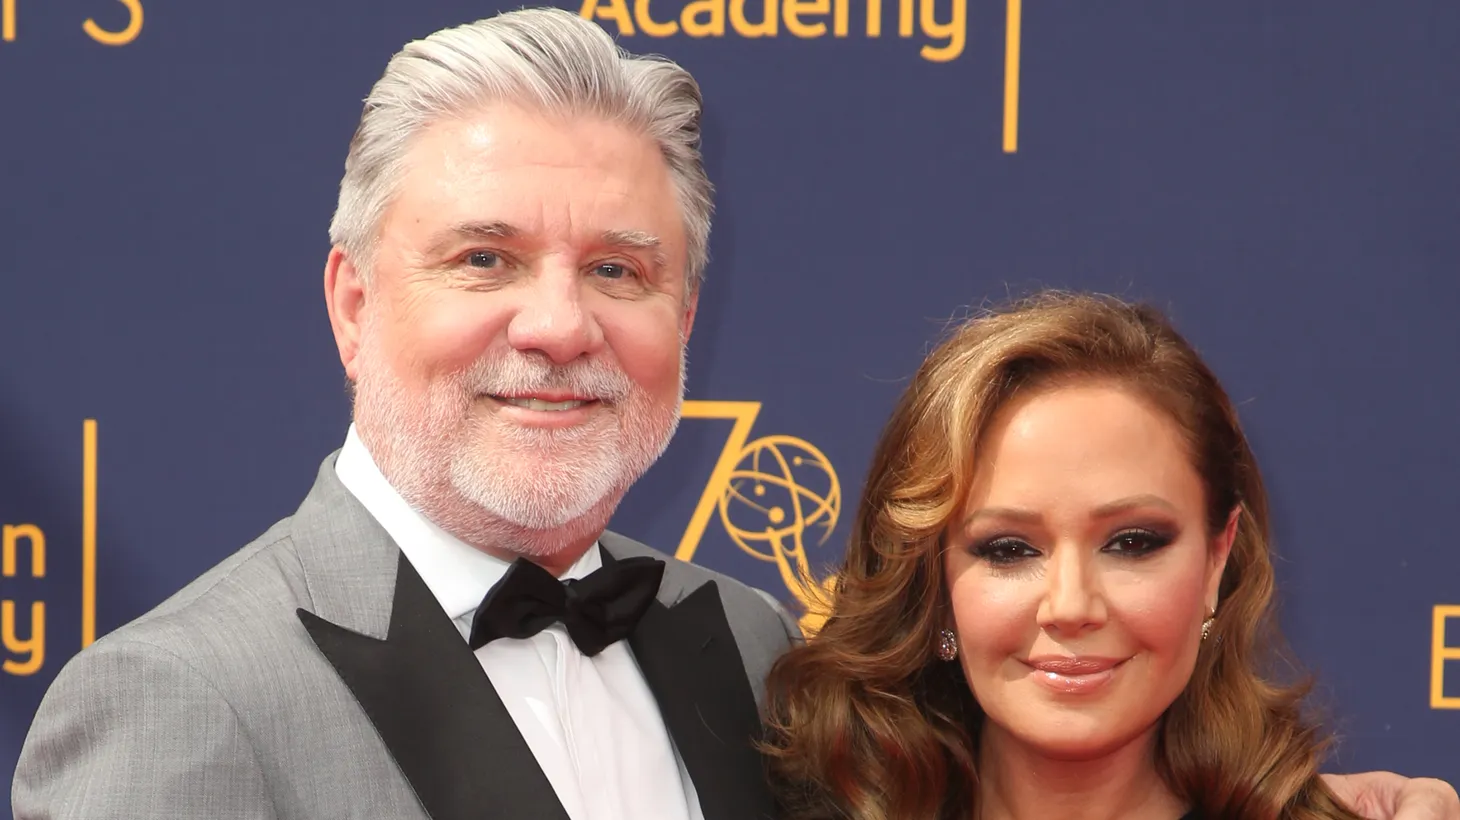 Former Scientology members Mike Rinder and actor Leah Remini attend the Creative Arts Emmy Awards in Los Angeles, on September 10, 2018.